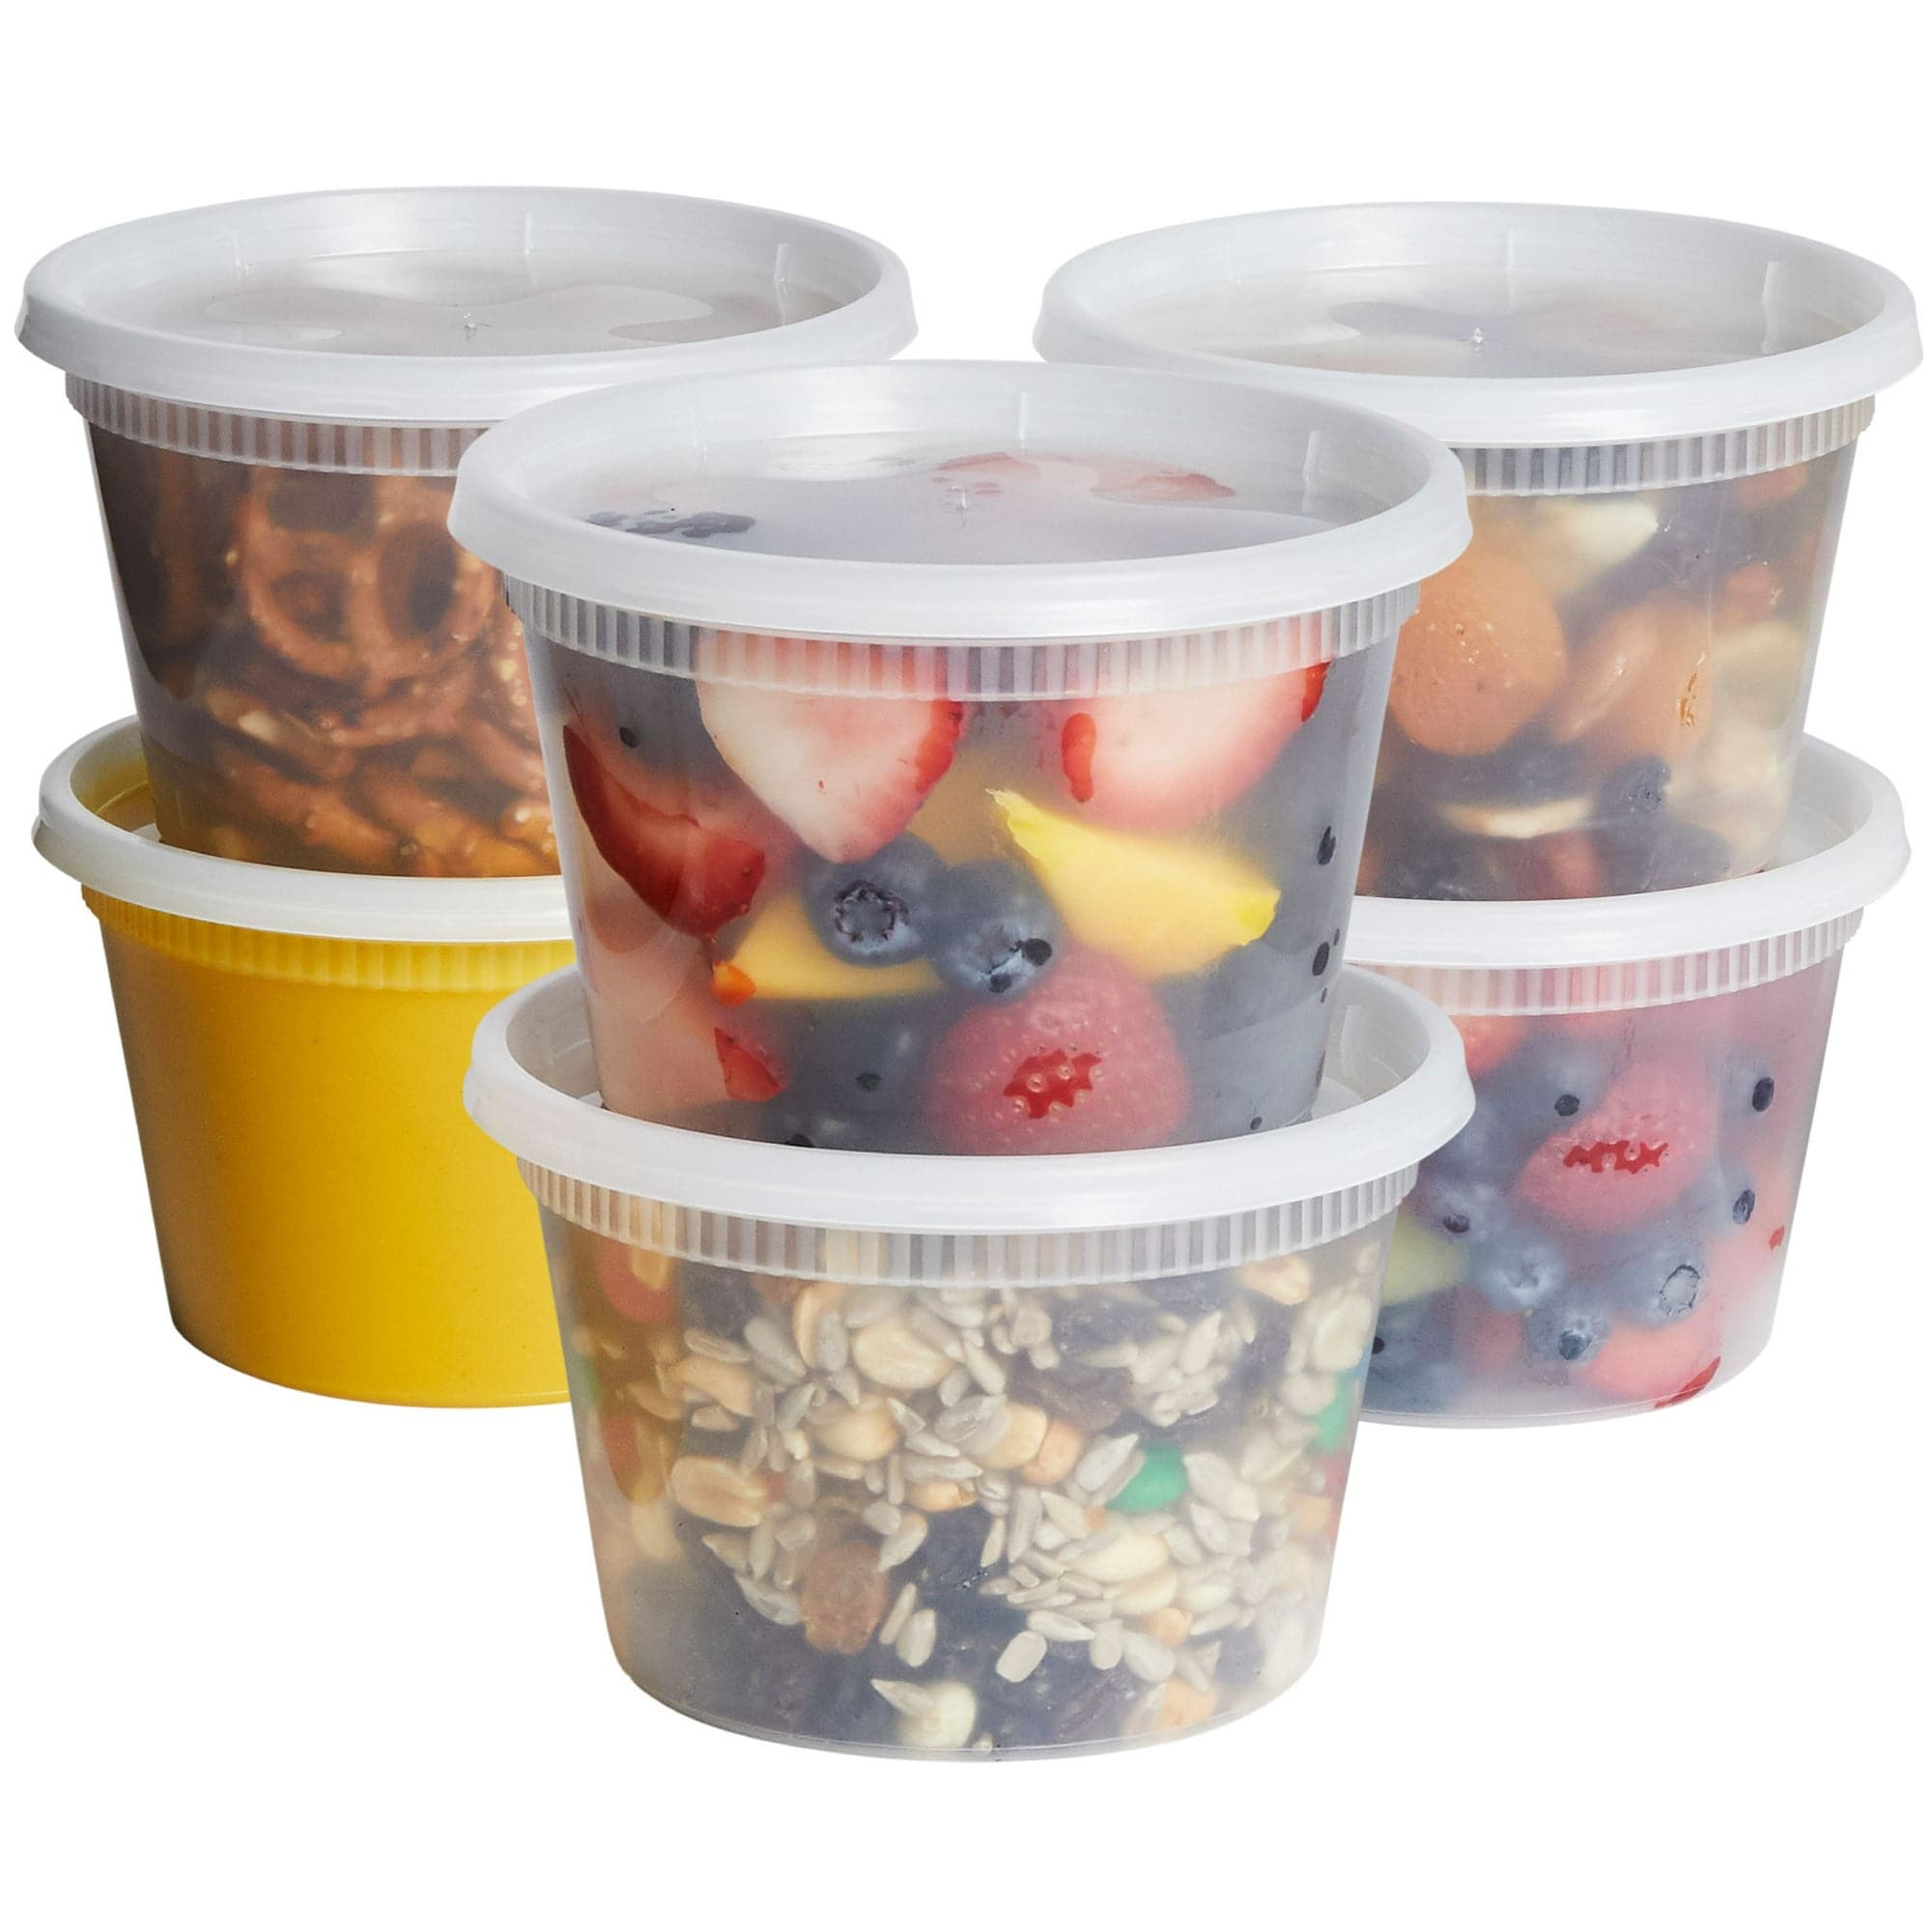 https://ak1.ostkcdn.com/images/products/is/images/direct/89b1619c104d51d187e3e9f030c0635510e1a213/Plastic-food-storage-box.jpg